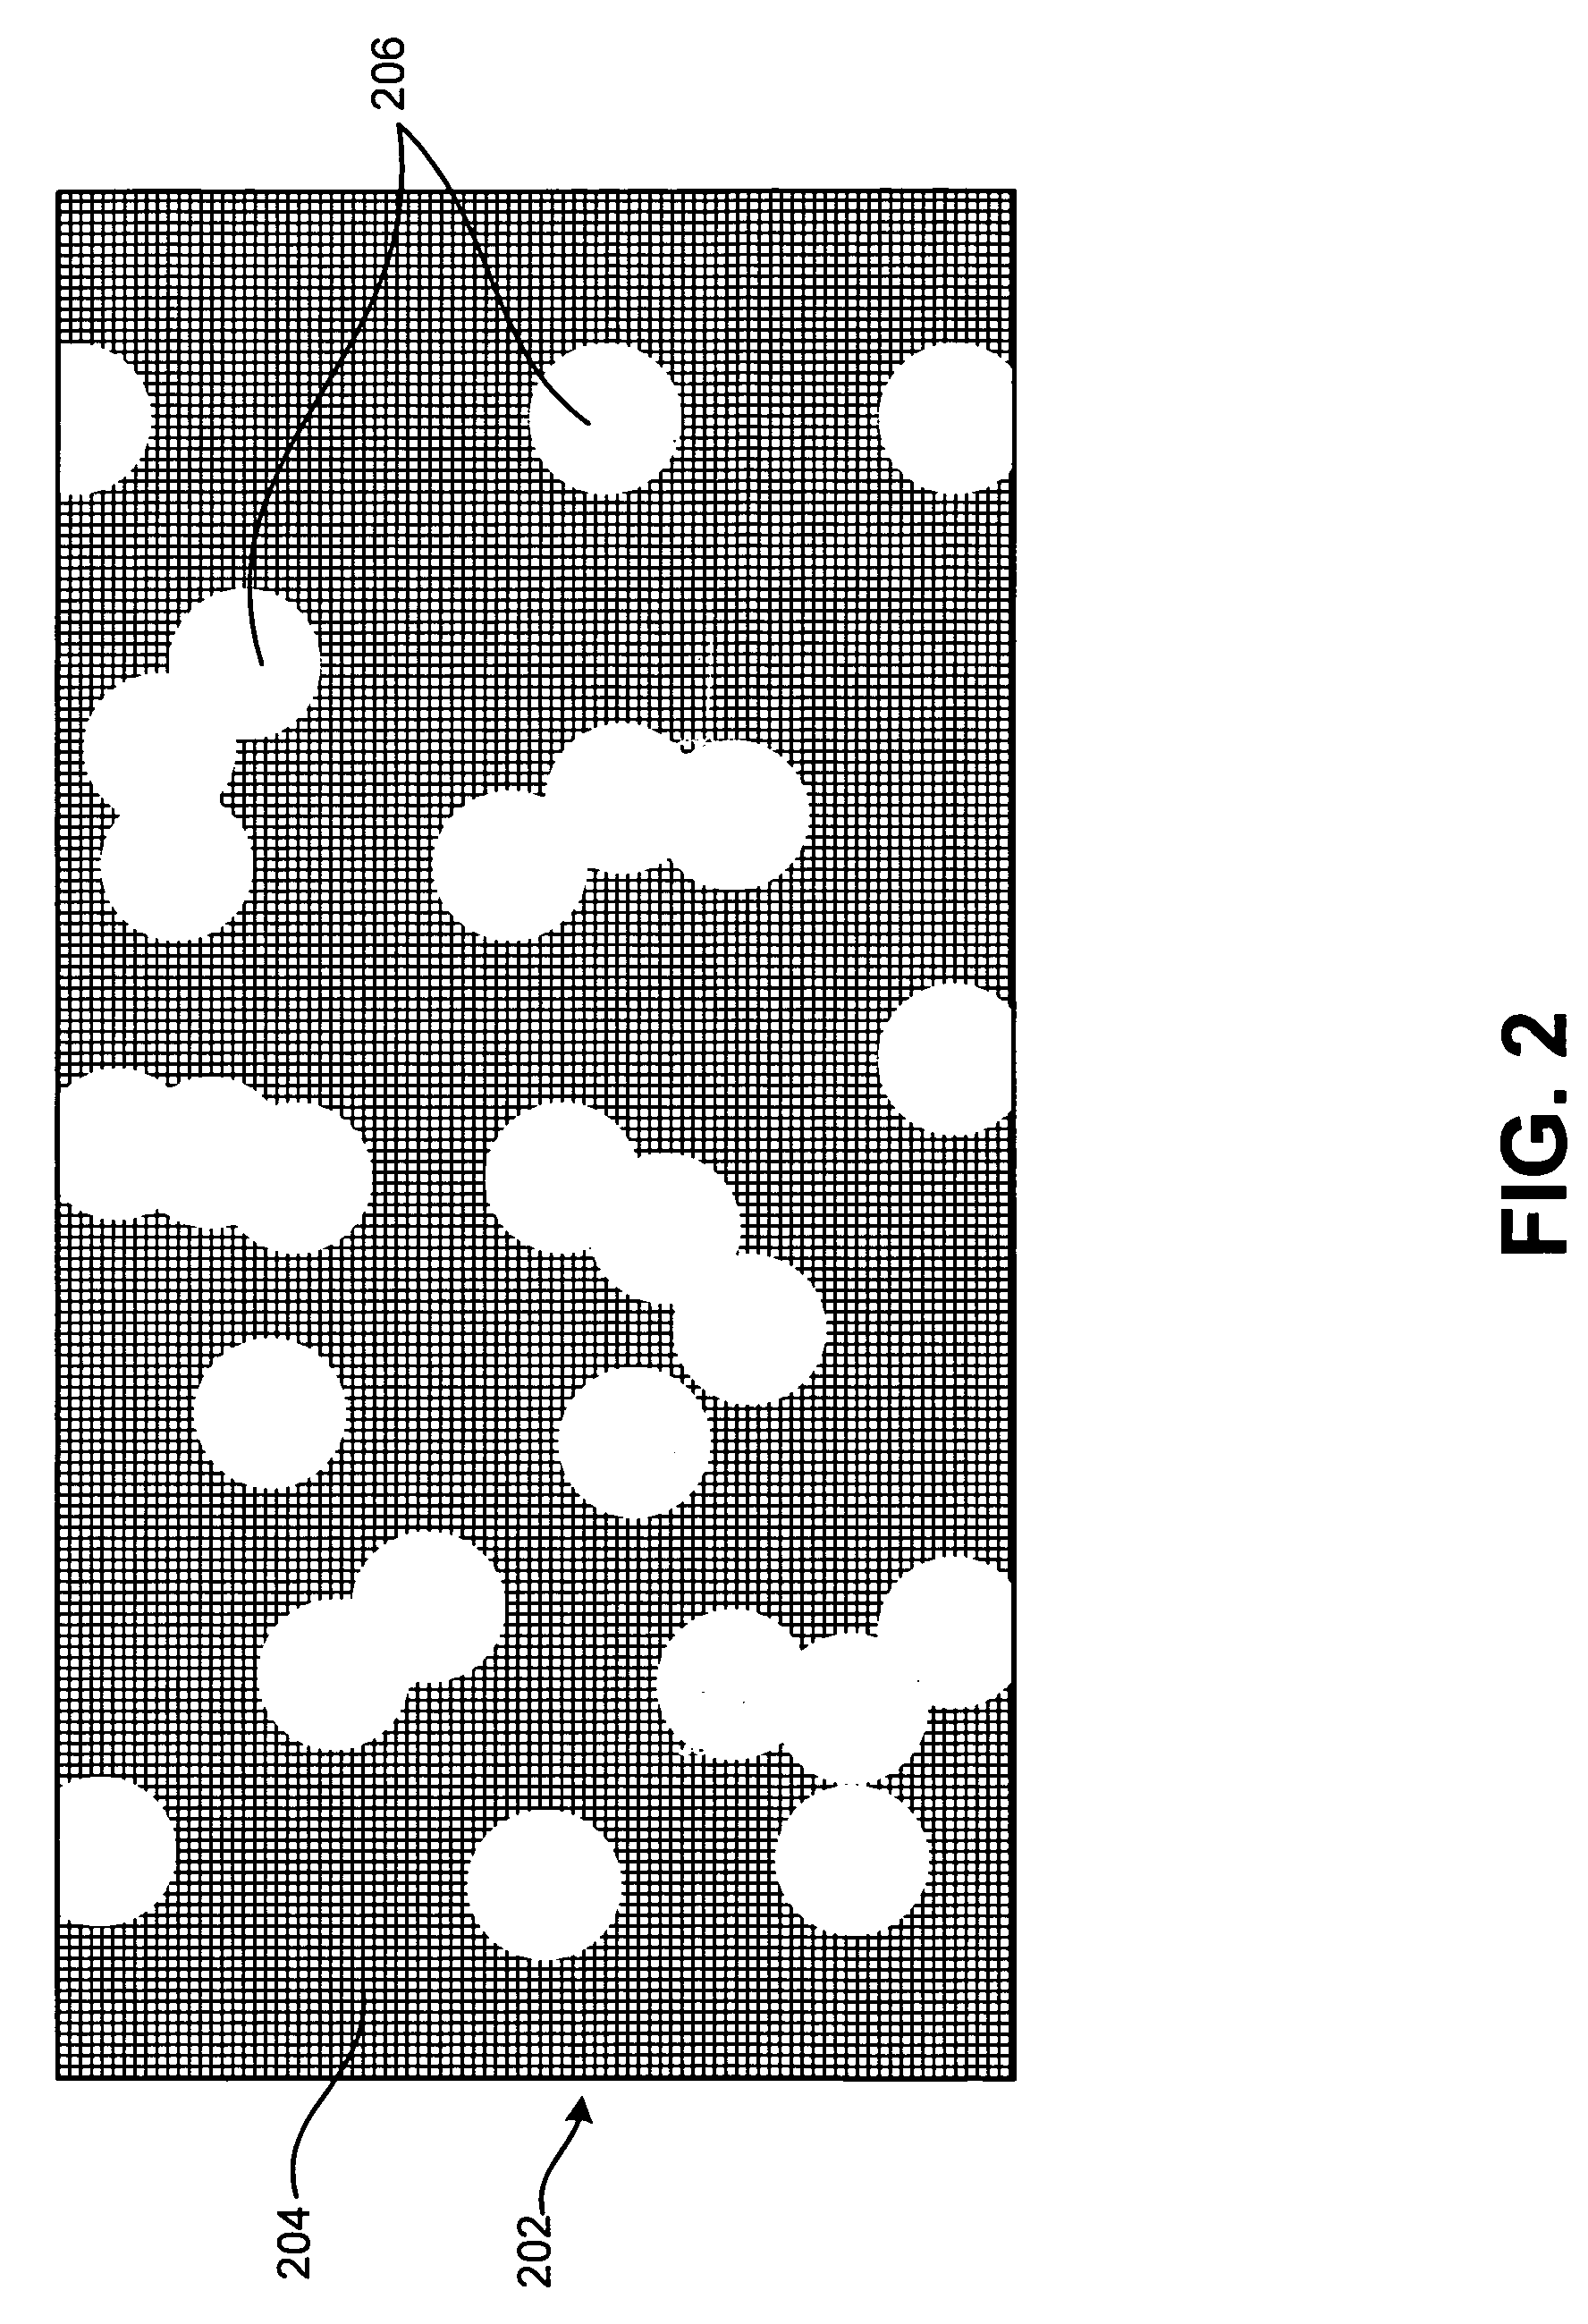 Nanoscale programmable structures and methods of forming and using same